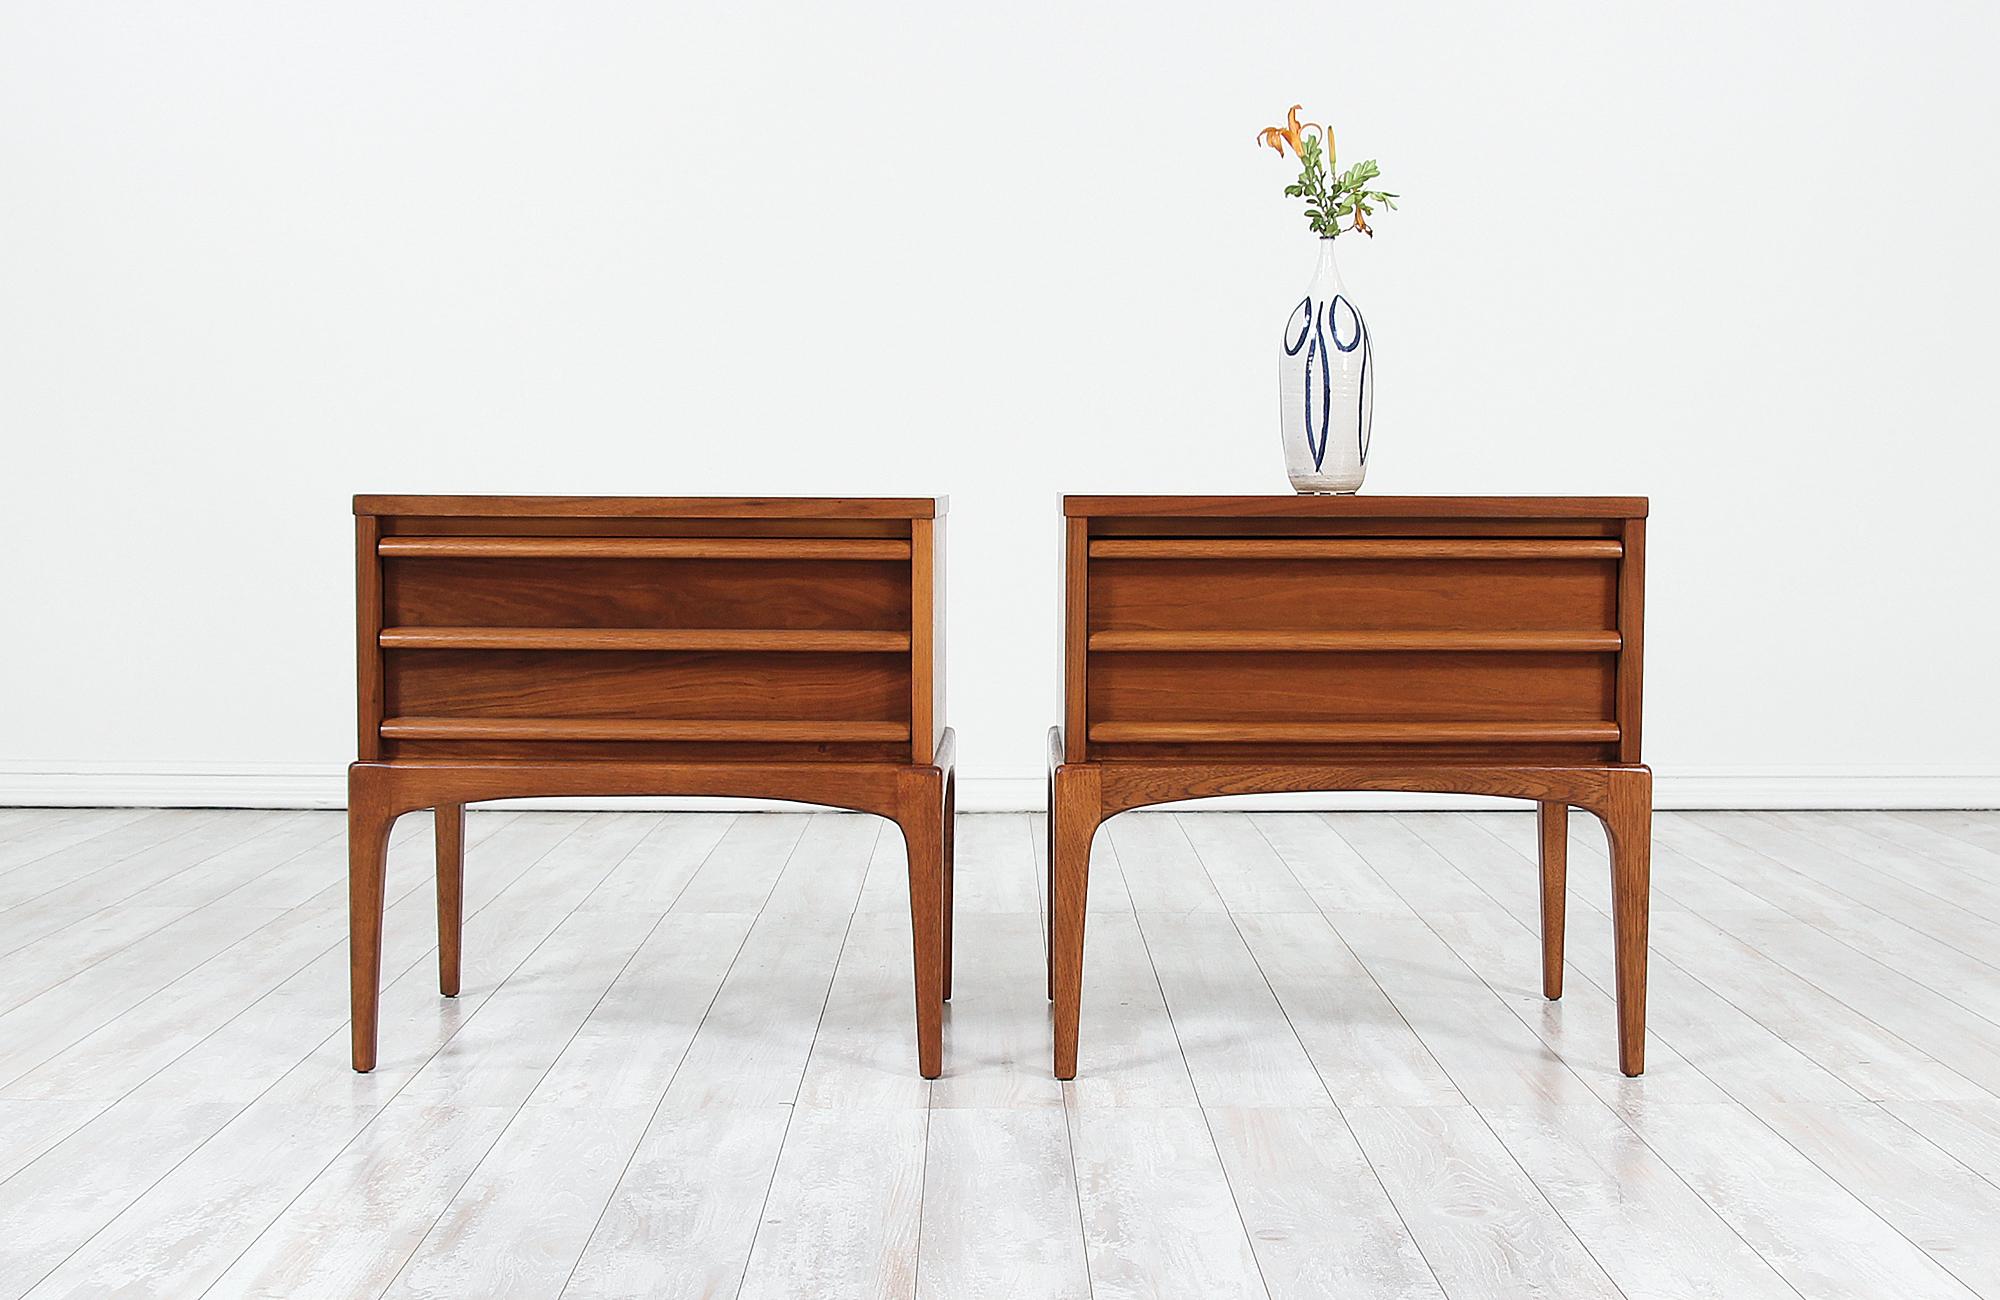 Pair of Mid-Century Modern night stands designed and manufactured in the United States by Lane Furniture, circa 1950s. This beautiful set of night stands feature a sturdy walnut wood case with a clean and minimalistic design and a big drawer with